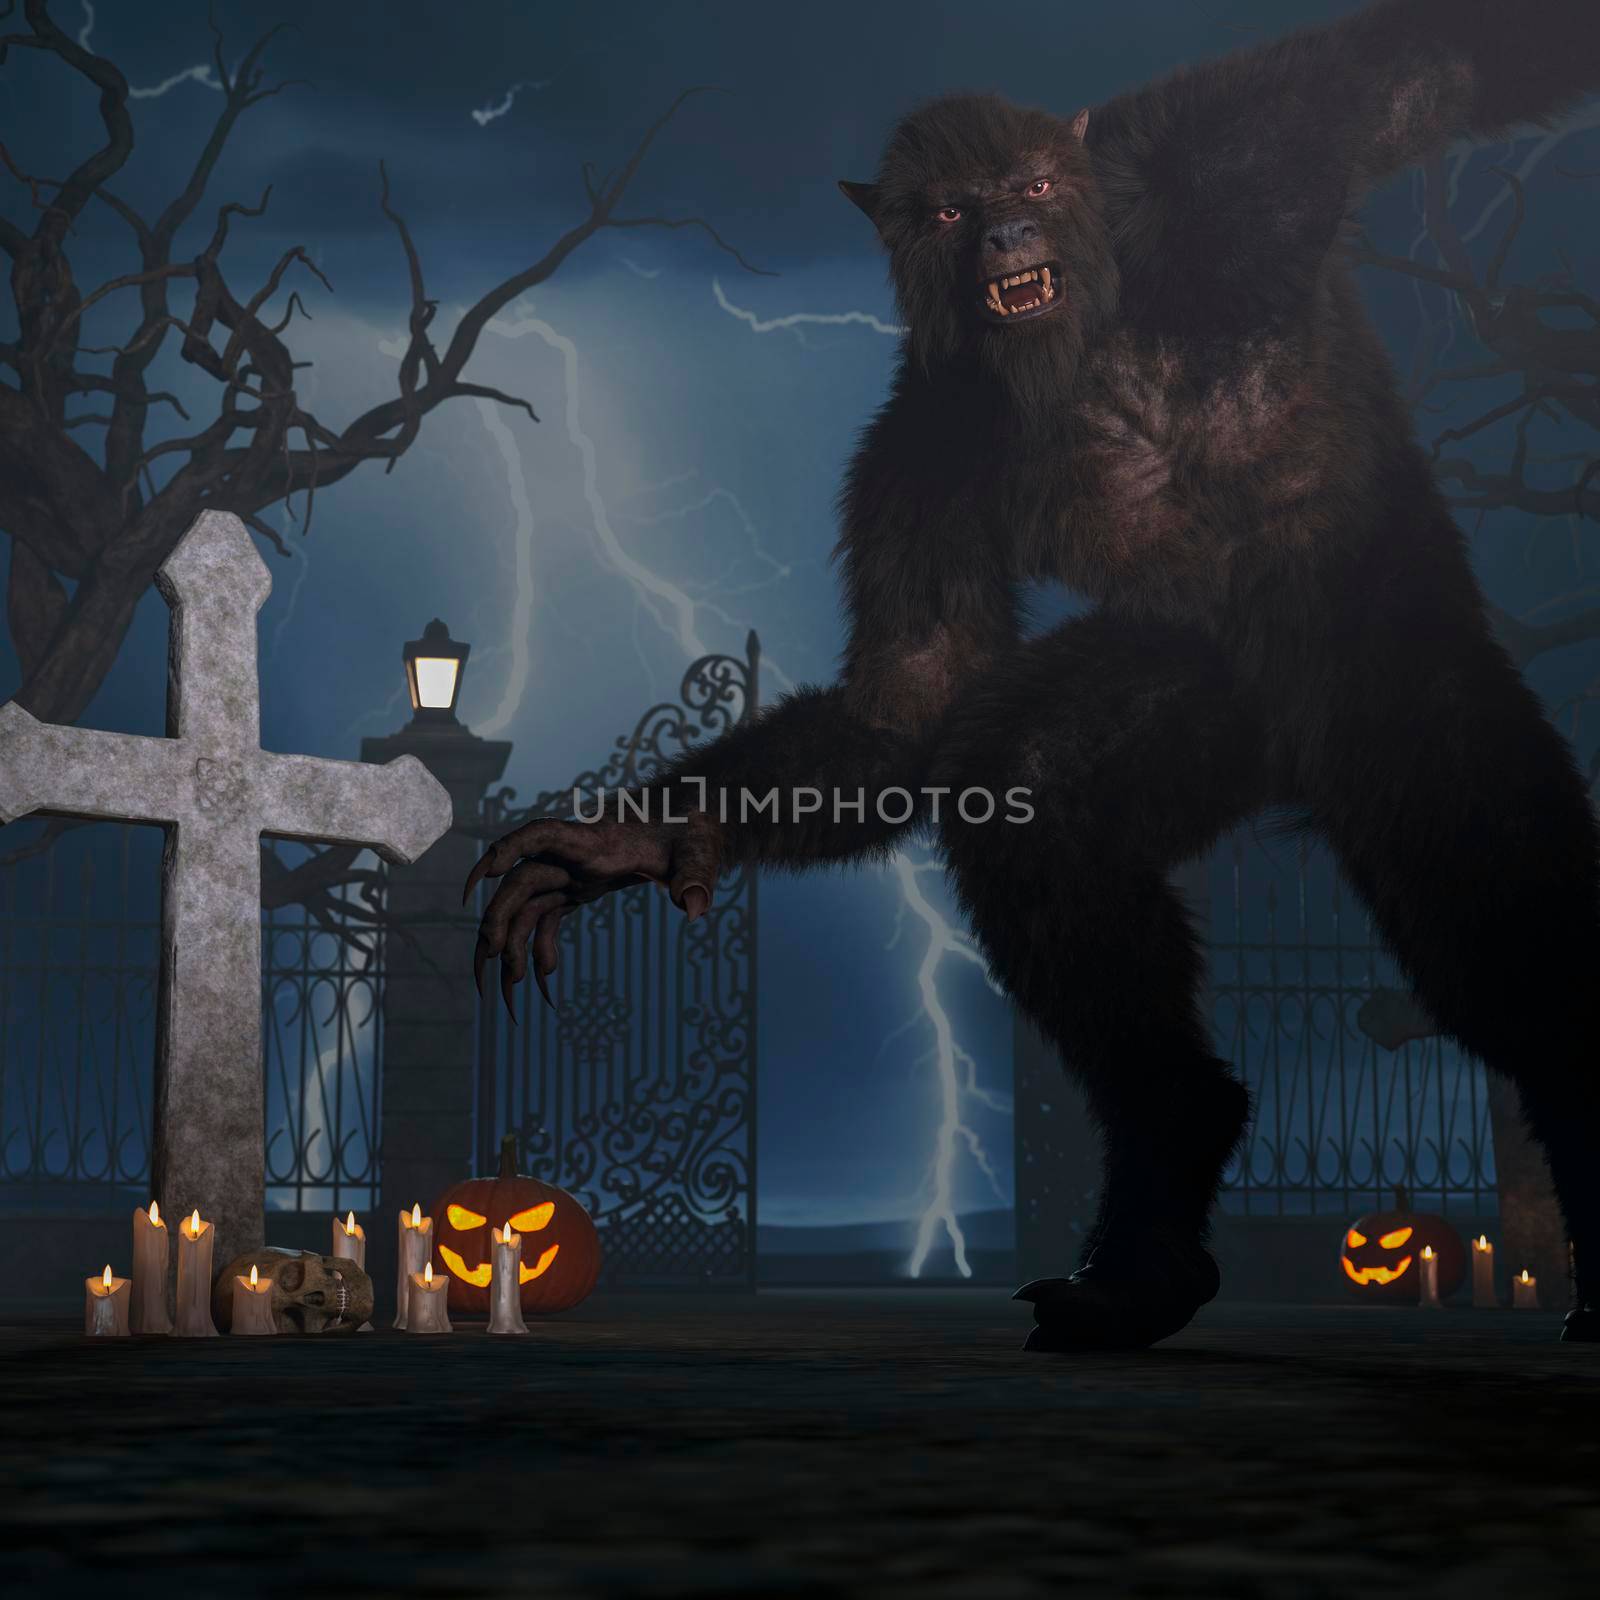 Illustration of a werewolf during the night in the creepy cemetery - 3d rendering